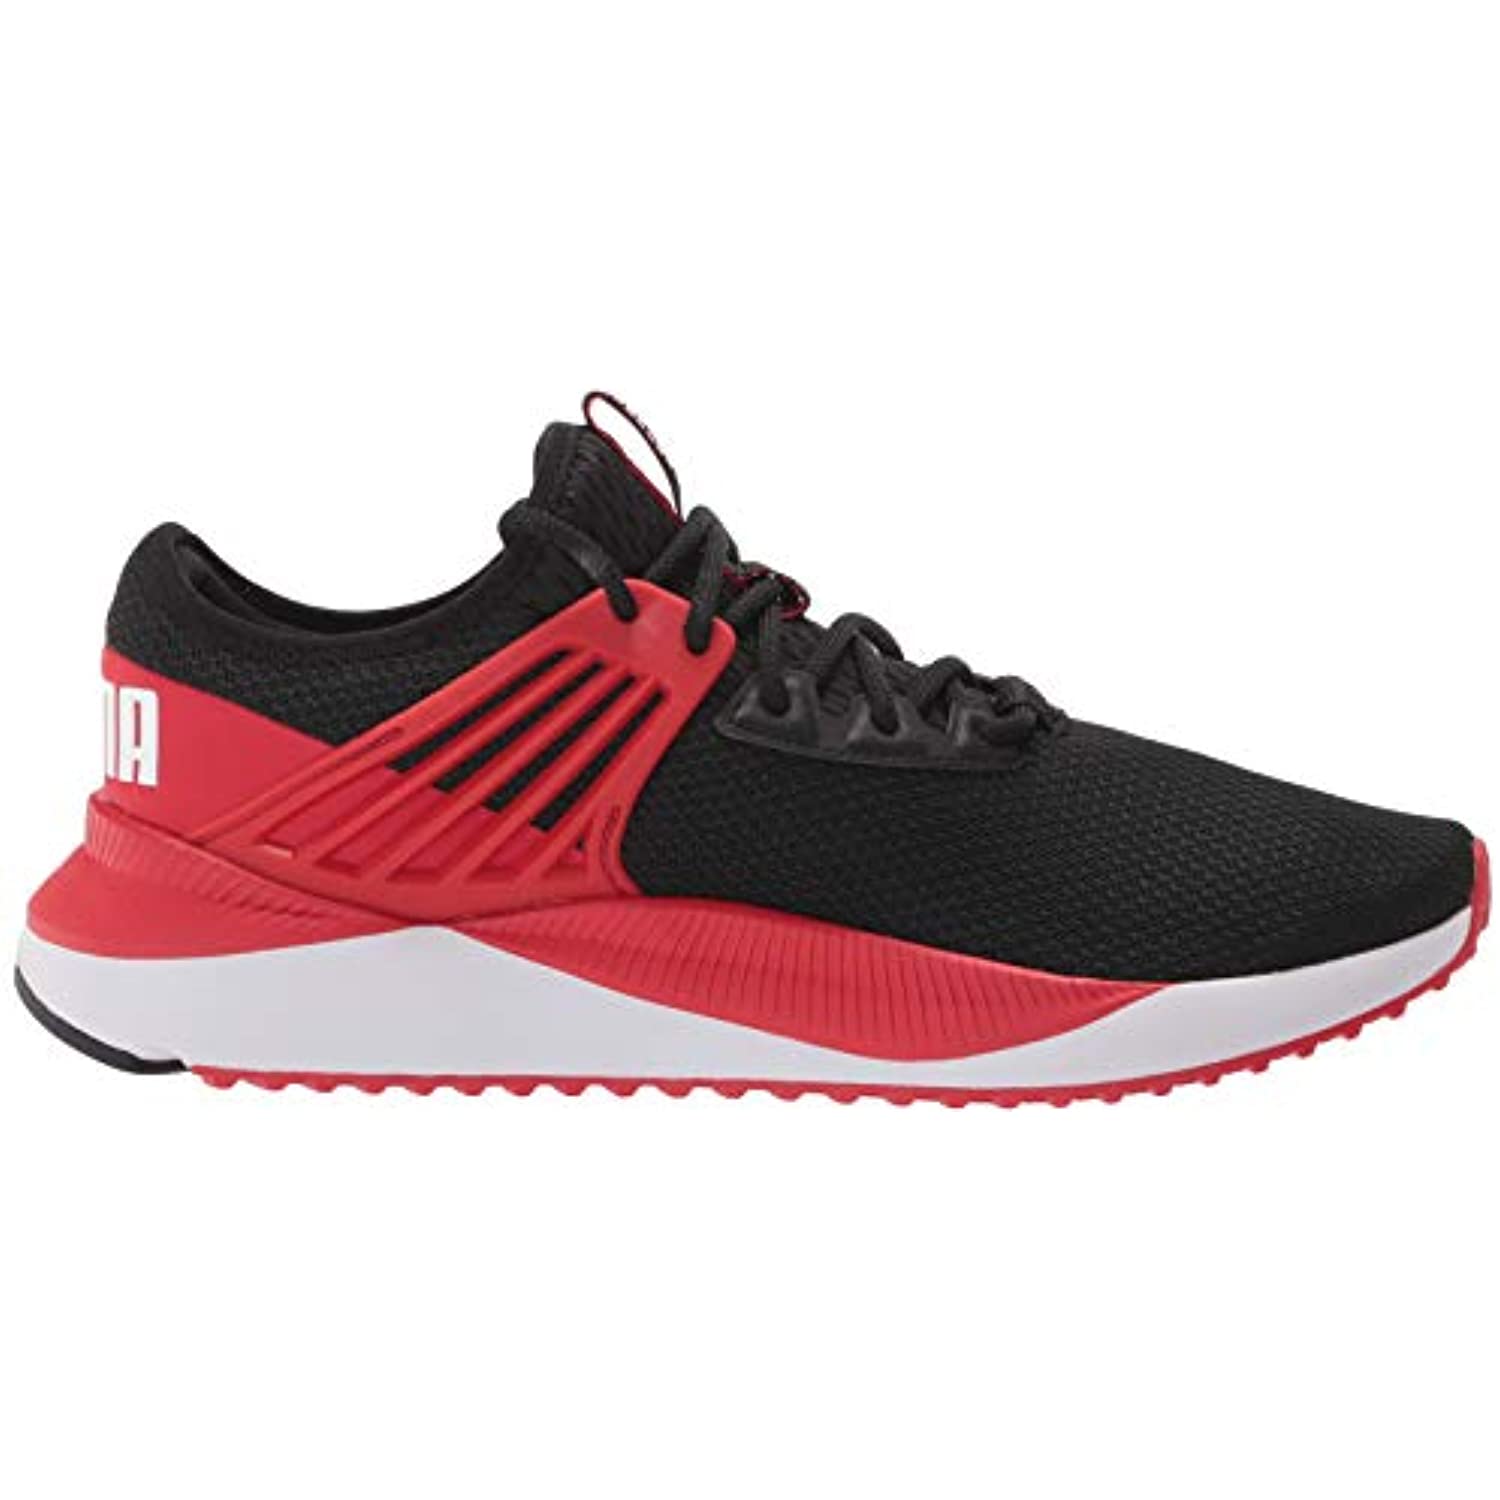 PUMA Men's Pacer Future Sneaker, Black-High Risk Red White, 12 - image 5 of 8